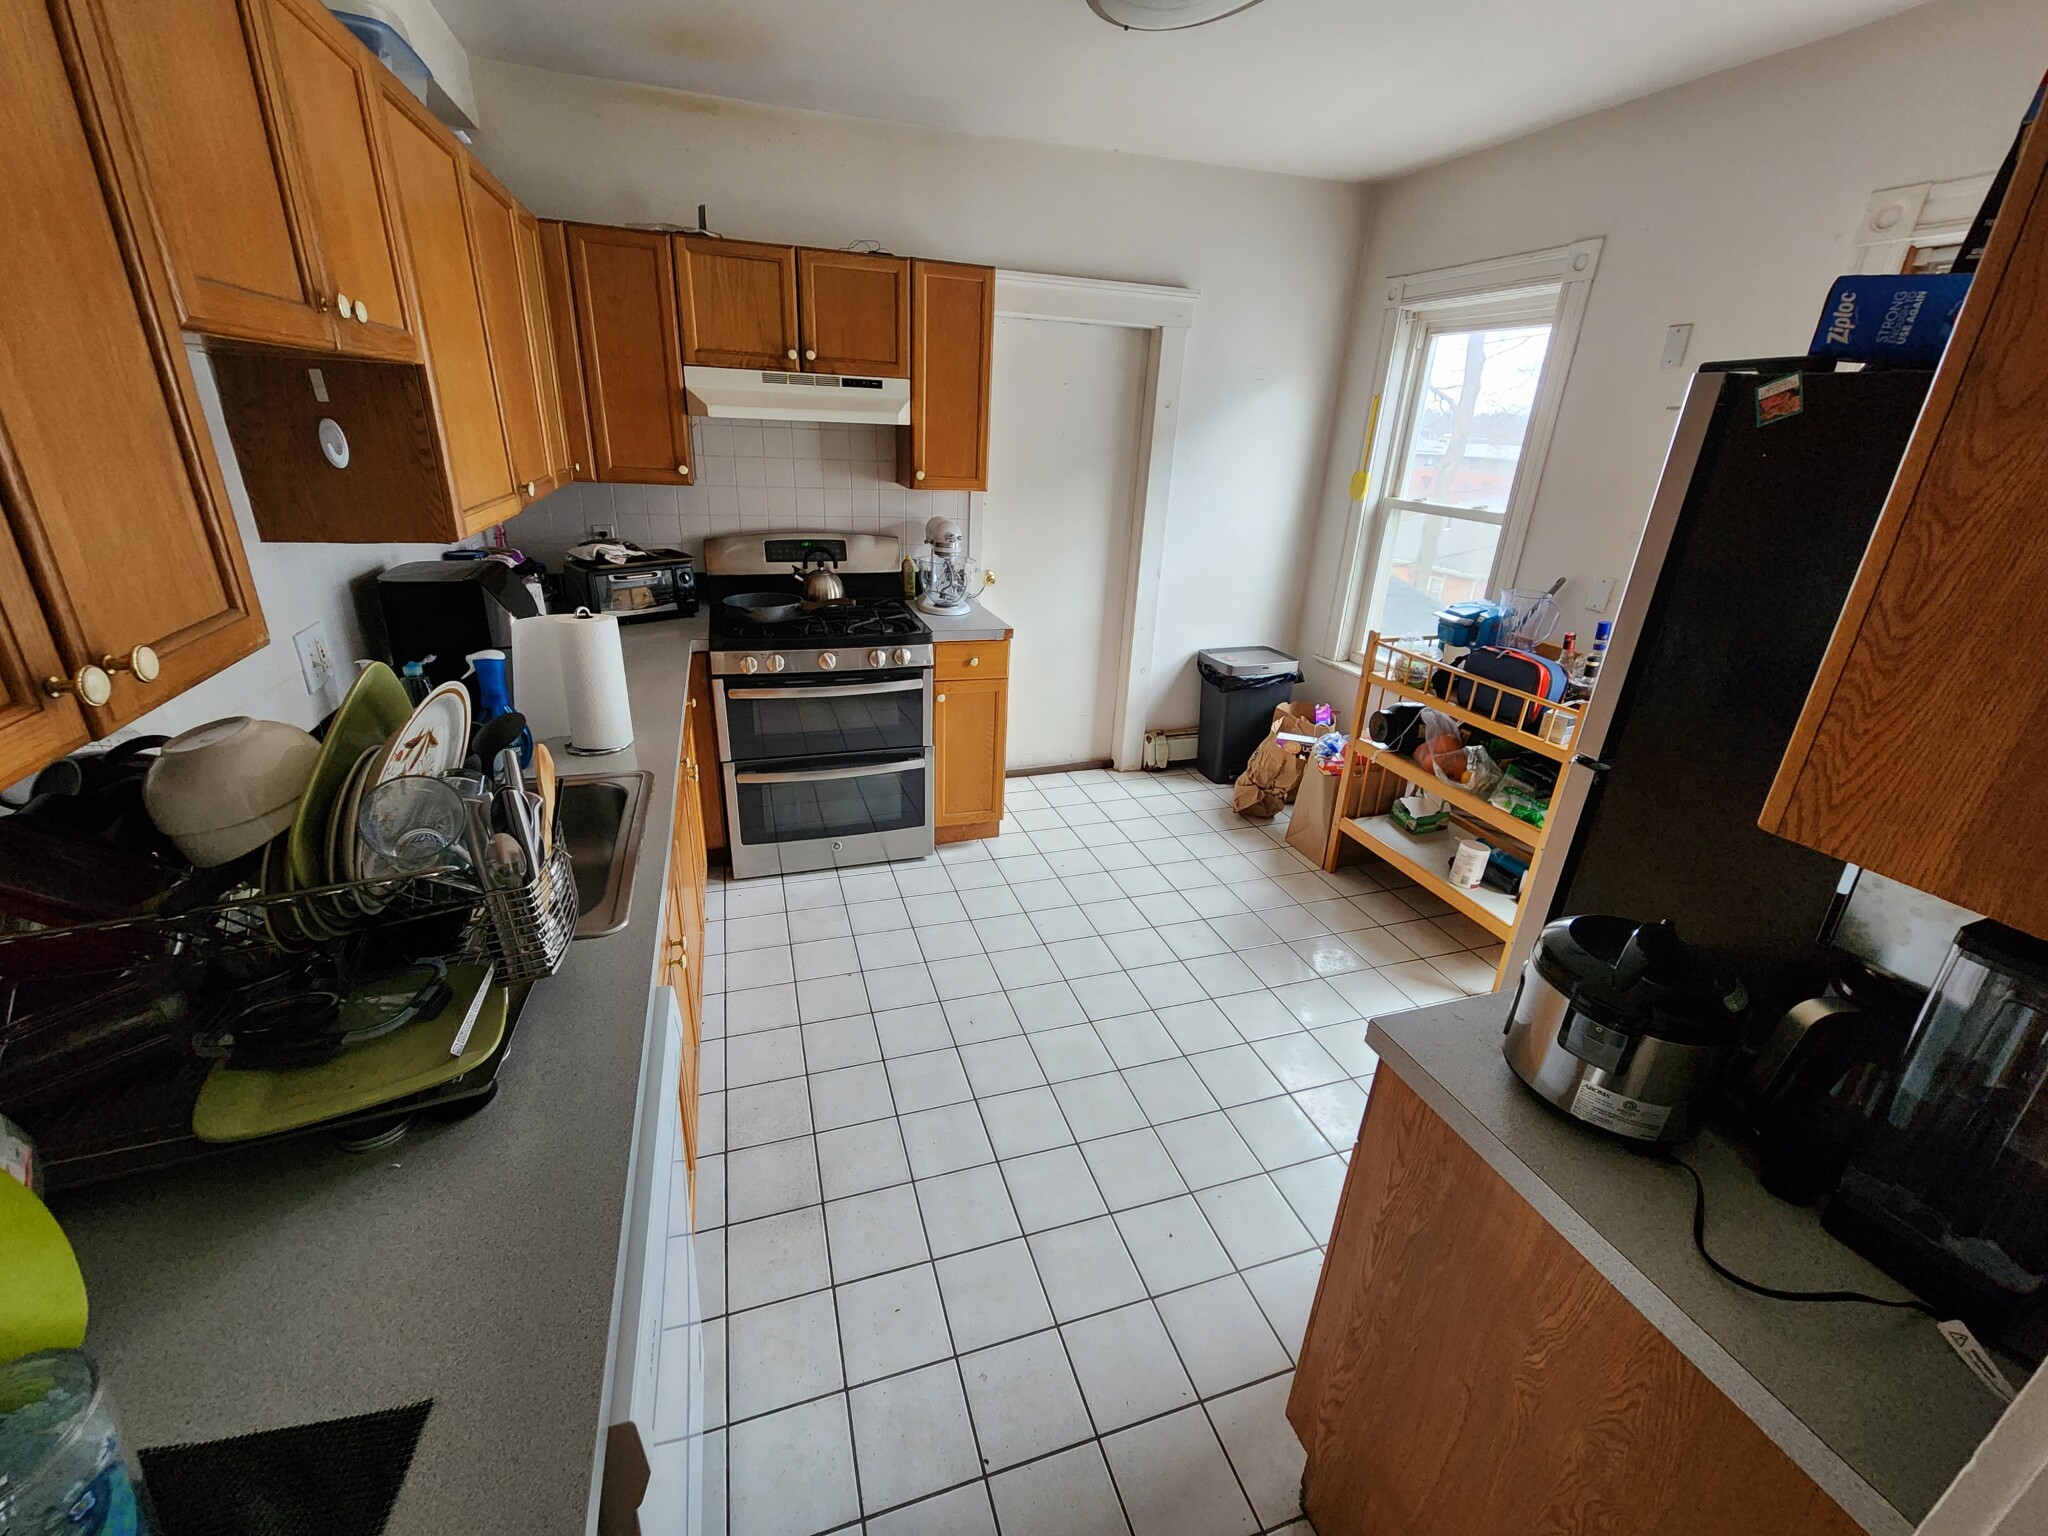 Photos of apartment on Union St.,Watertown MA 02472